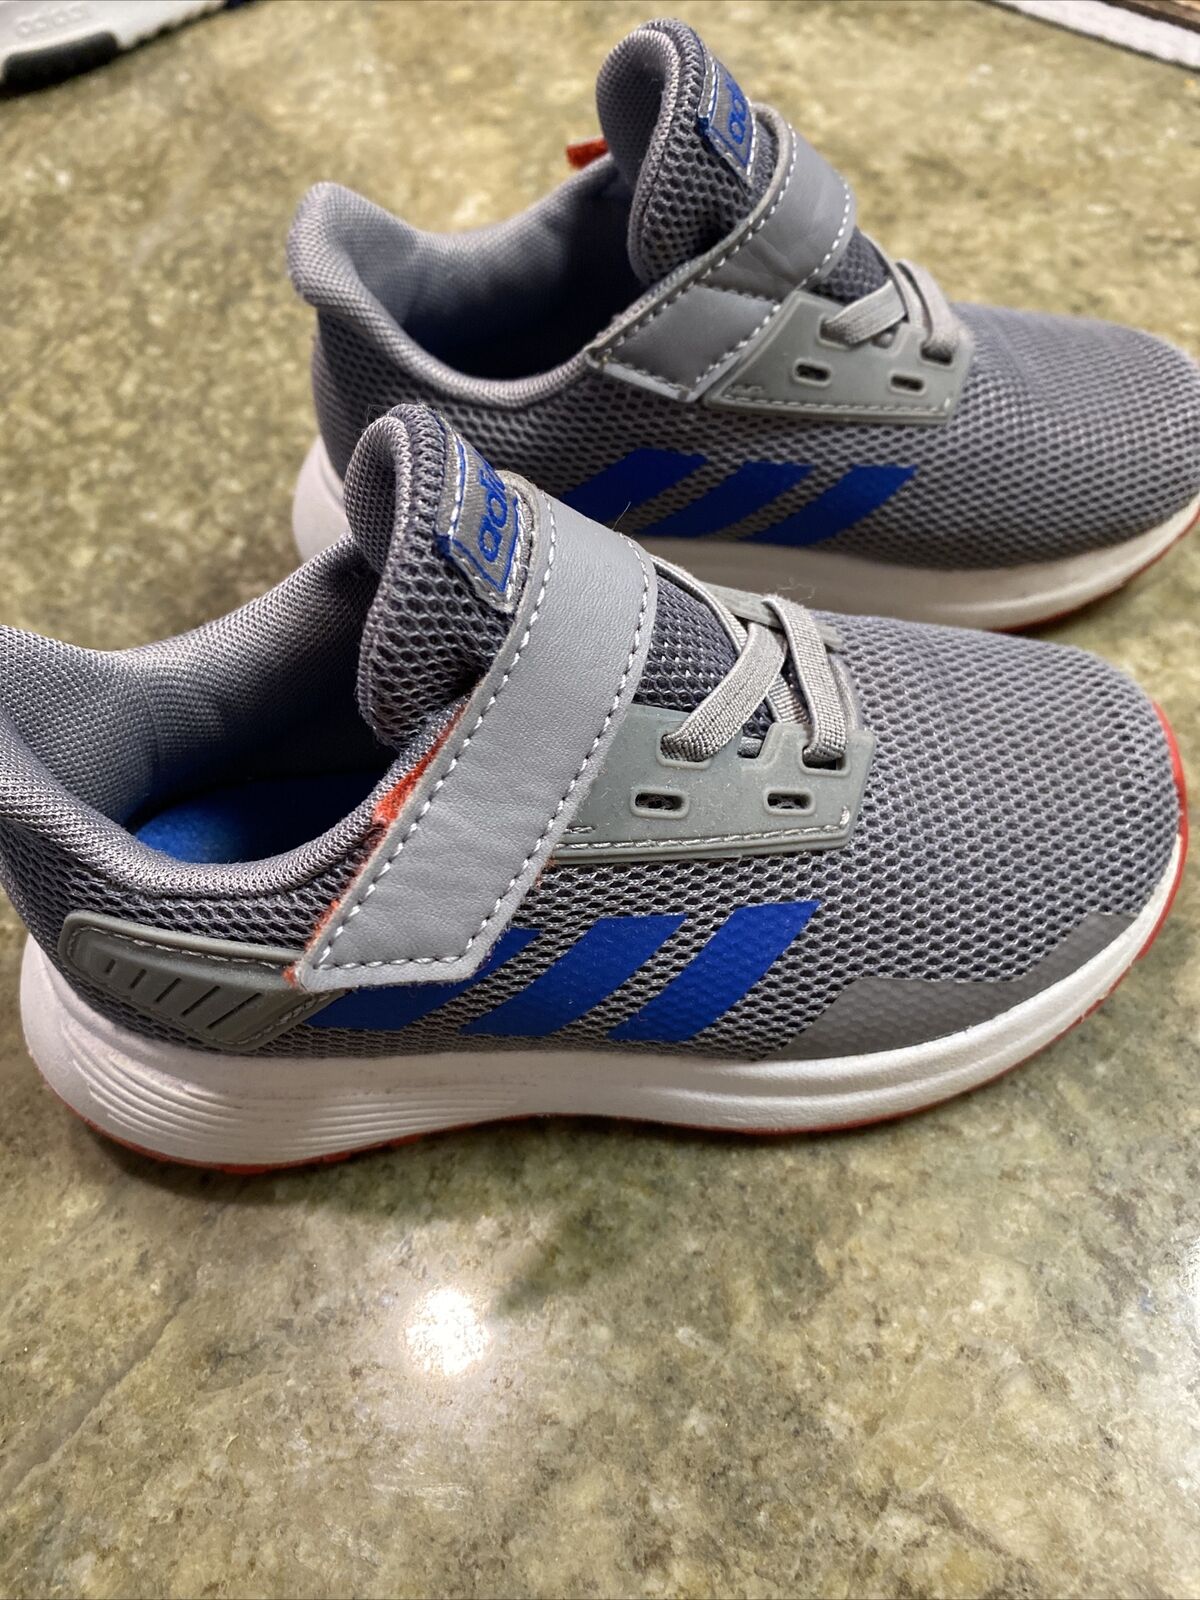 Grey, Blue And Red adidas toddler shoes size 9